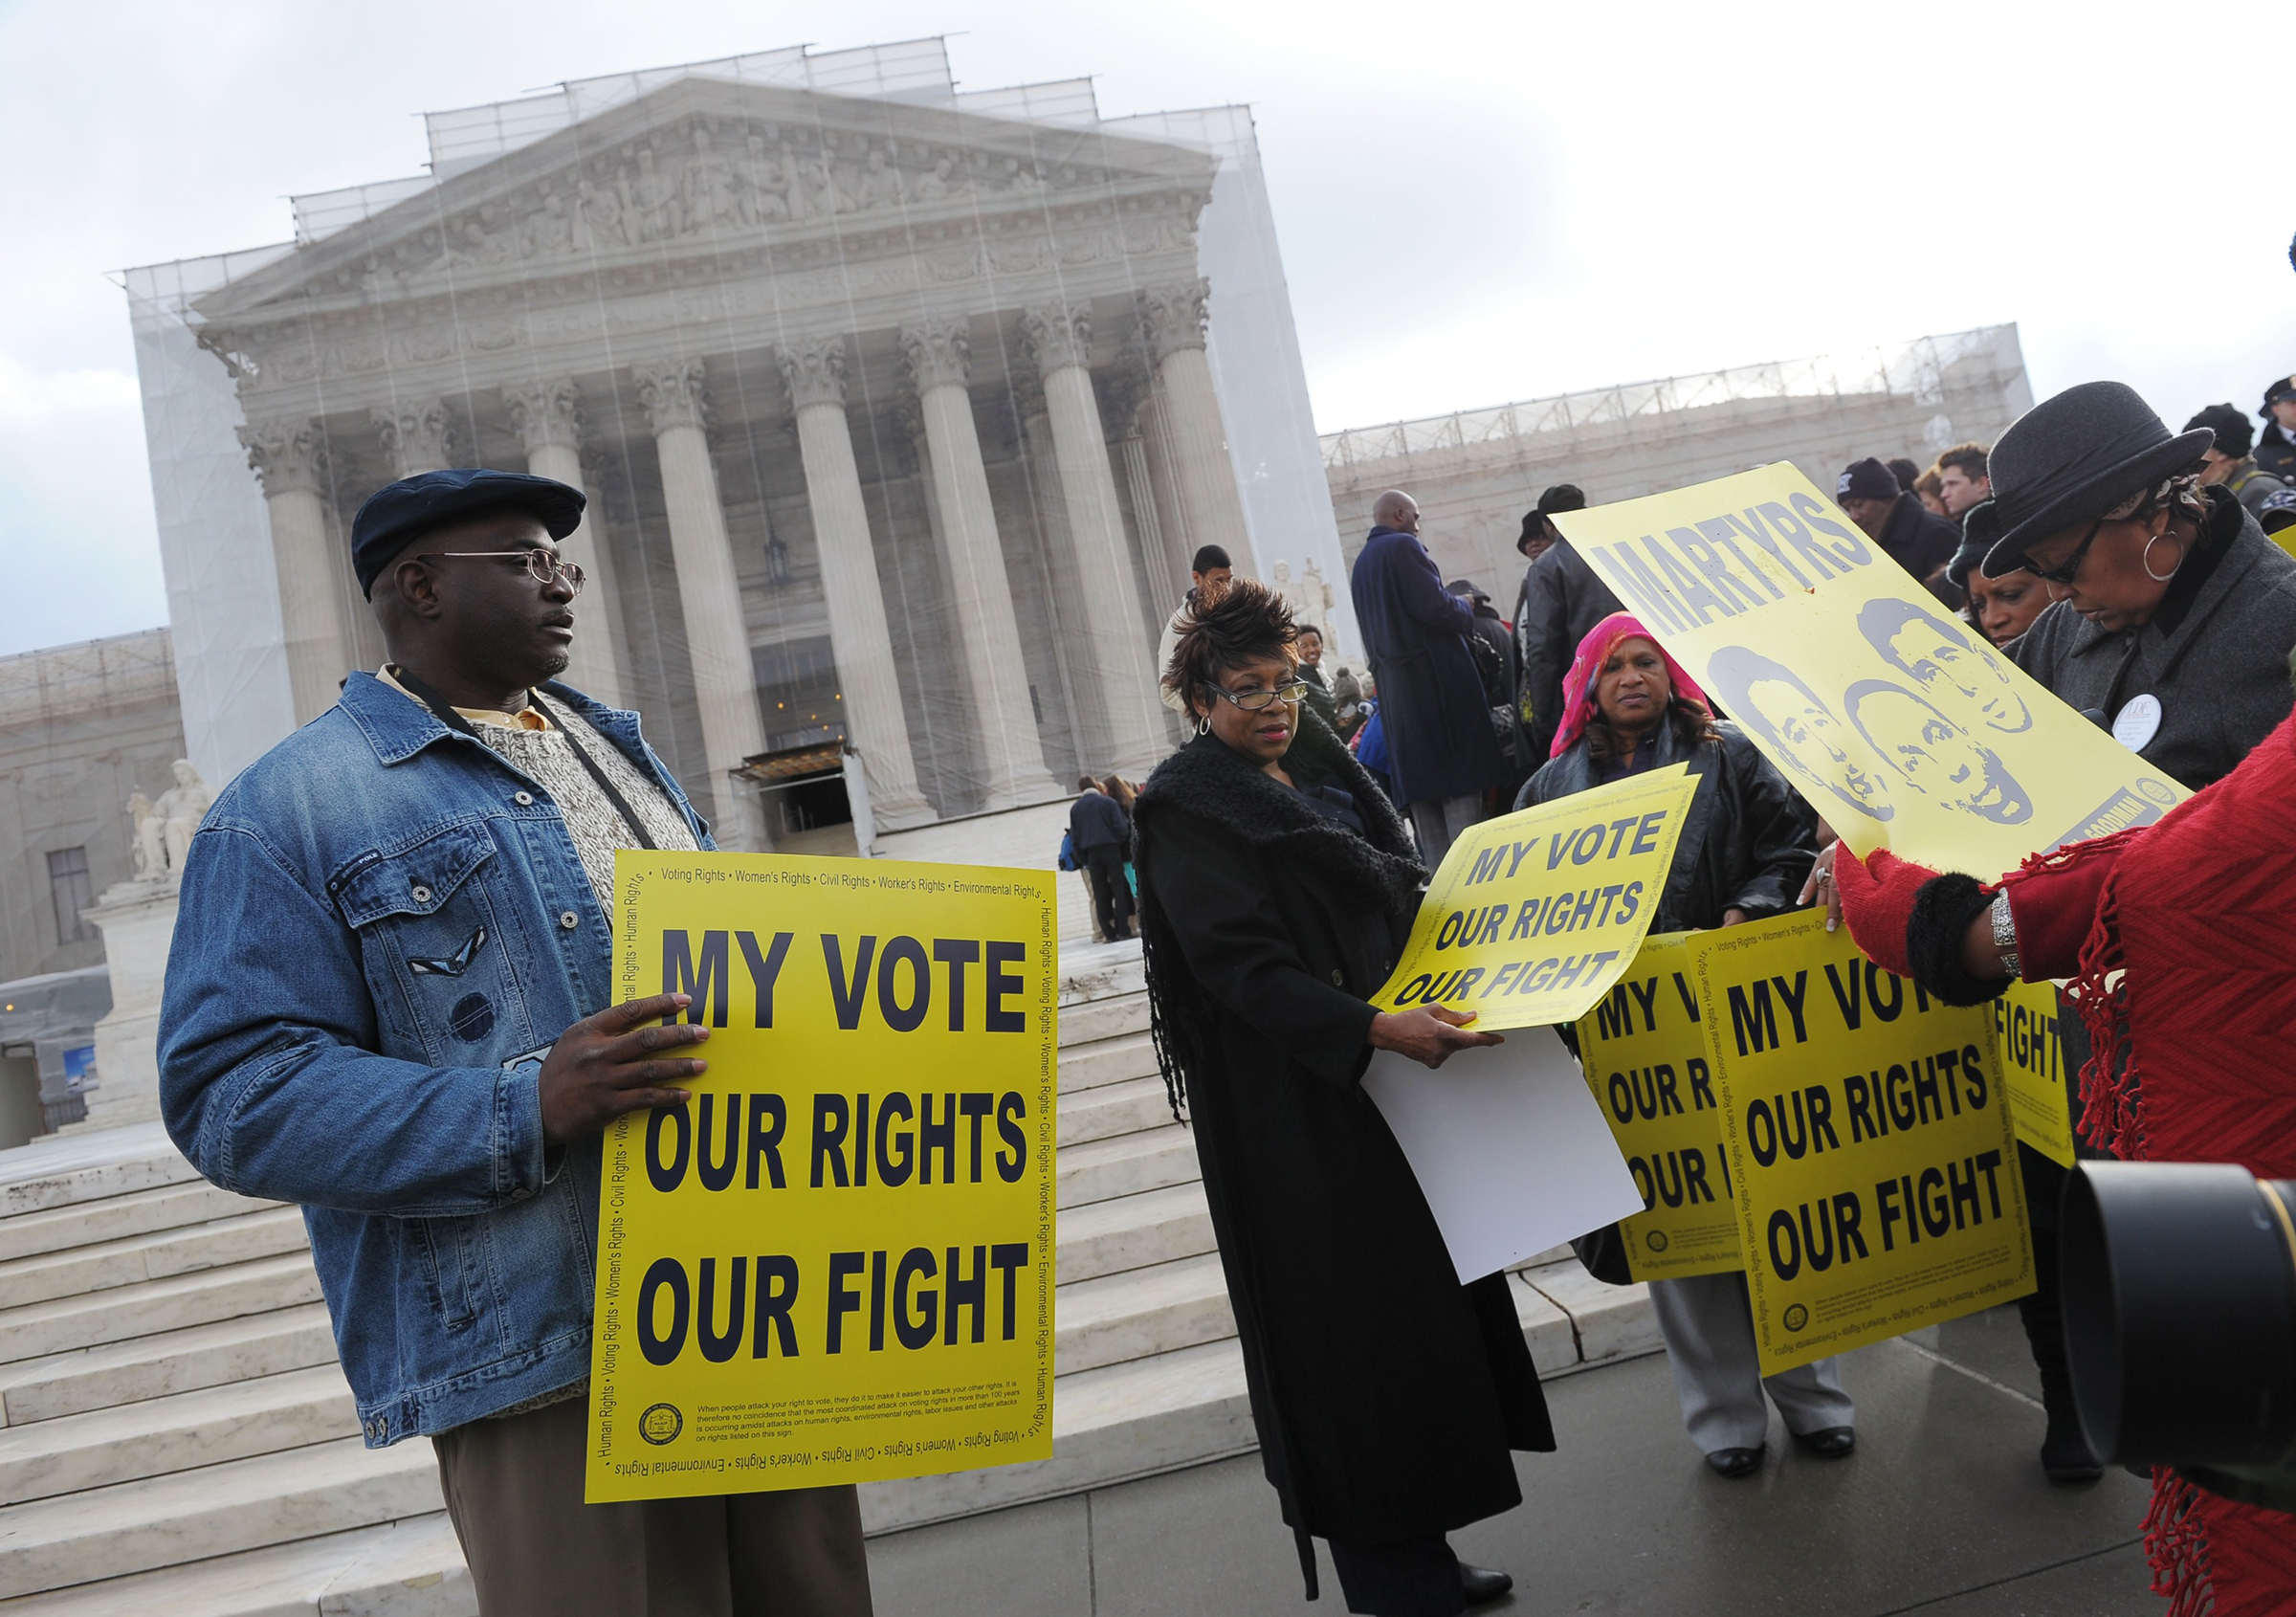 Activists distribute pro-voting rights placards outside the Supreme Court in Washington, D.C., on Feb. 27, 2013, as the Court prepares to hear Shelby County vs Holder. (Mandel Ngan—AFP/Getty Images)